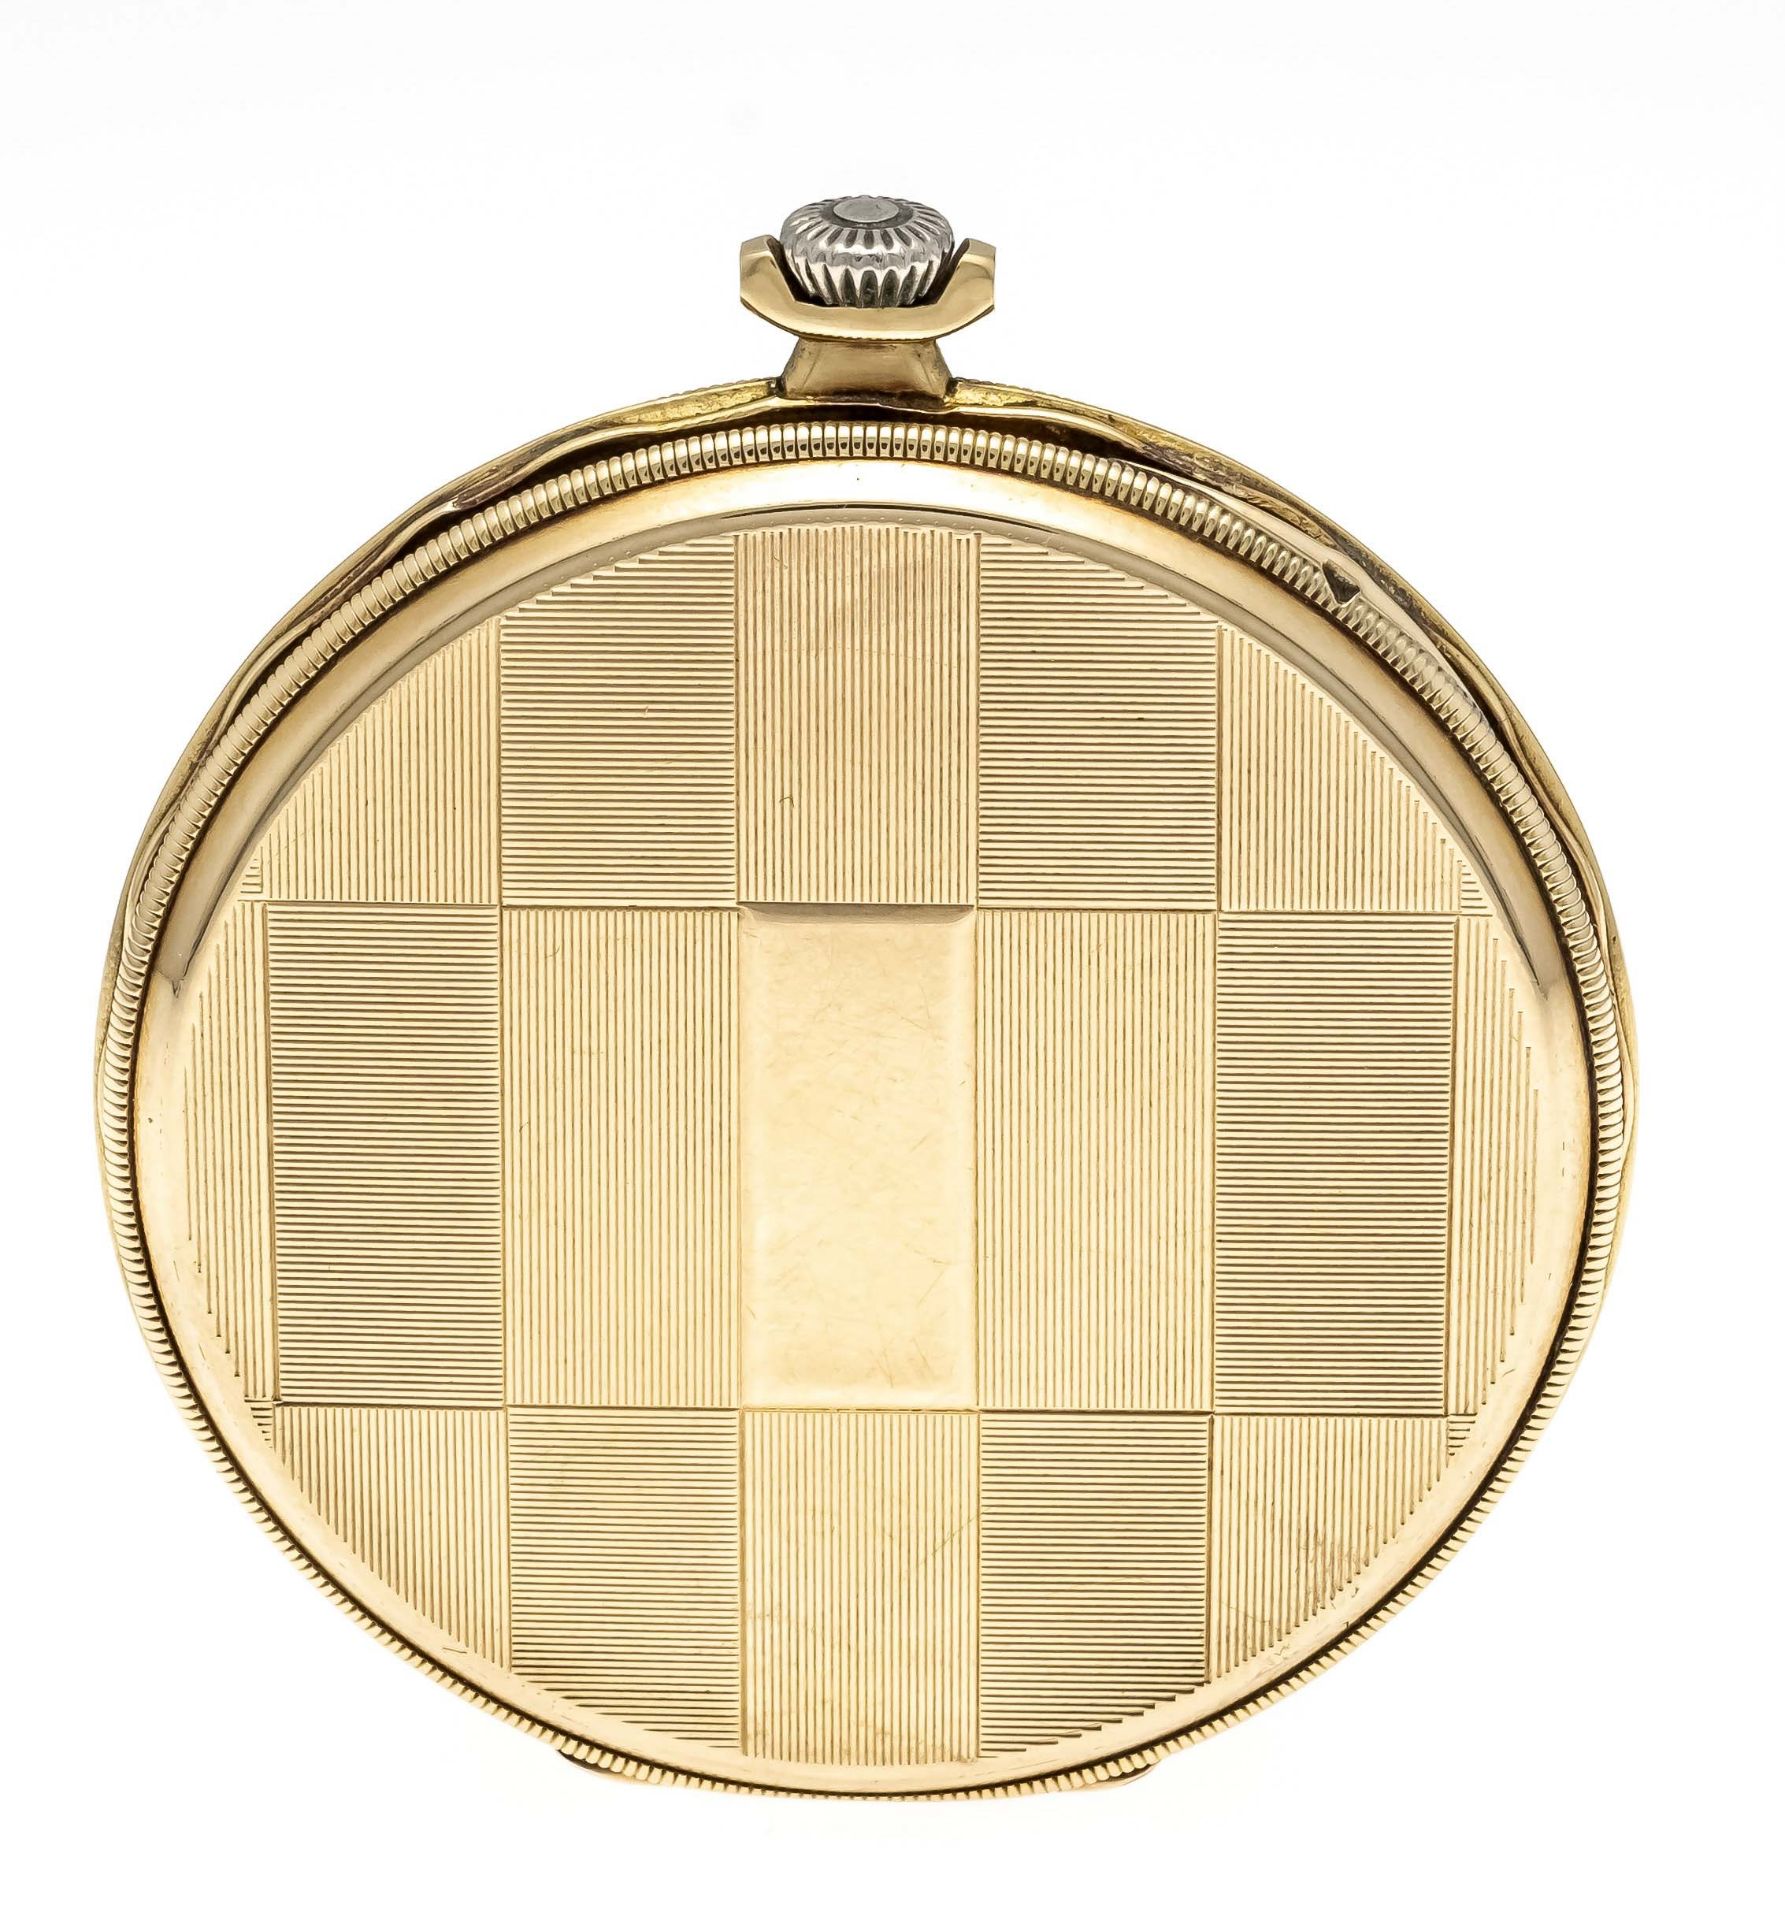 IWC gentleman's pocket watch open, 585/000 GG, coin rim cover and back decorated with checkerboard - Image 2 of 4